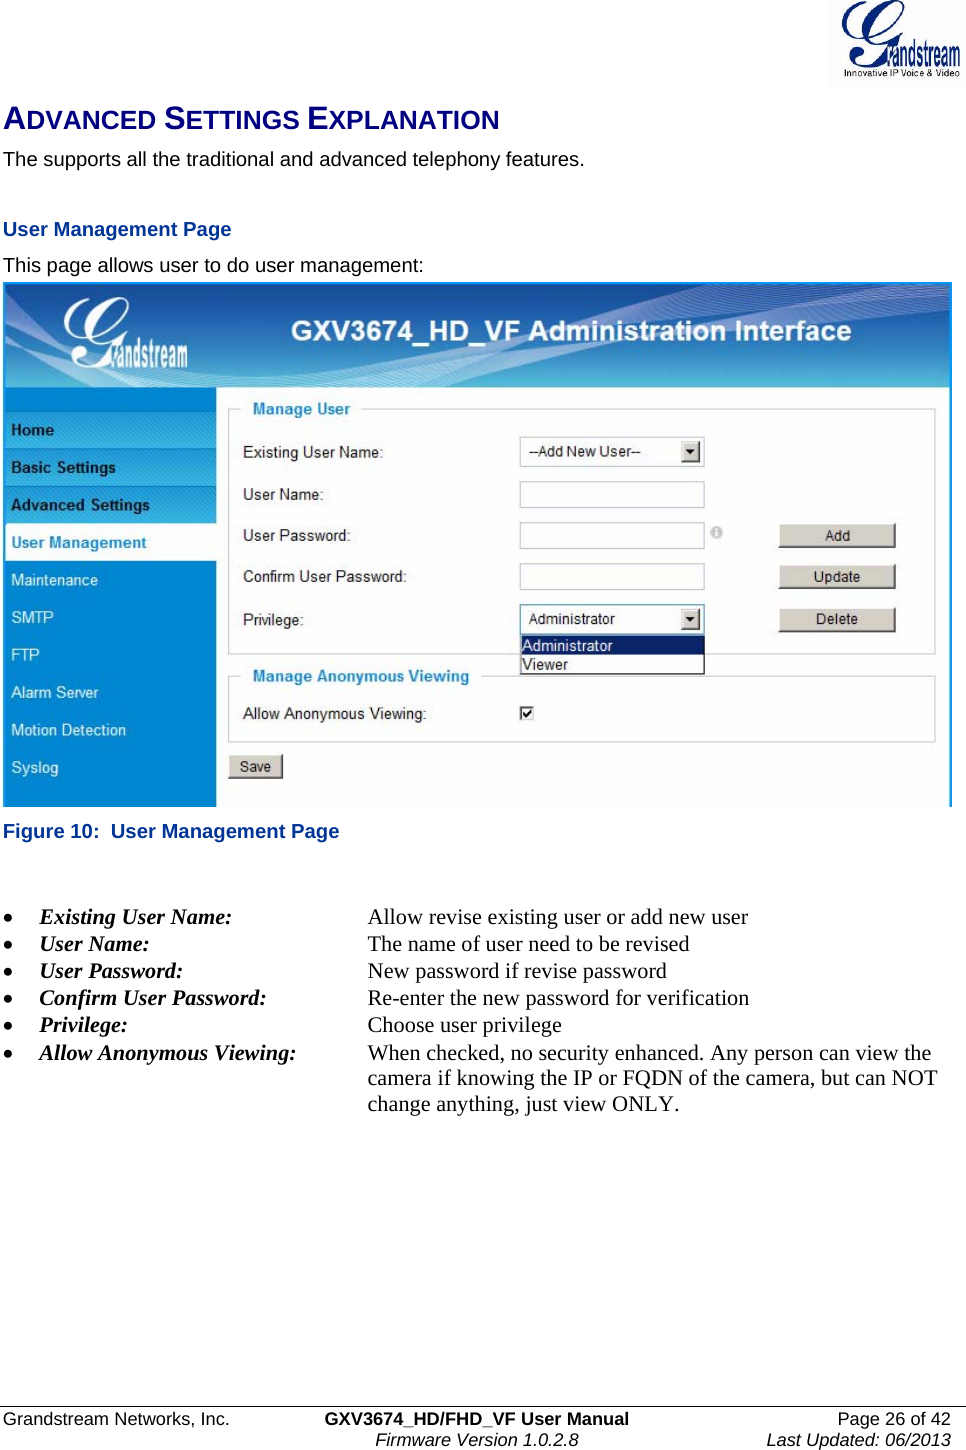  Grandstream Networks, Inc.  GXV3674_HD/FHD_VF User Manual  Page 26 of 42   Firmware Version 1.0.2.8  Last Updated: 06/2013  ADVANCED SETTINGS EXPLANATION The supports all the traditional and advanced telephony features.     User Management Page This page allows user to do user management:  Figure 10:  User Management Page  • Existing User Name:    Allow revise existing user or add new user • User Name:      The name of user need to be revised • User Password:      New password if revise password • Confirm User Password:    Re-enter the new password for verification • Privilege:    Choose user privilege • Allow Anonymous Viewing:  When checked, no security enhanced. Any person can view the       camera if knowing the IP or FQDN of the camera, but can NOT            change anything, just view ONLY.   